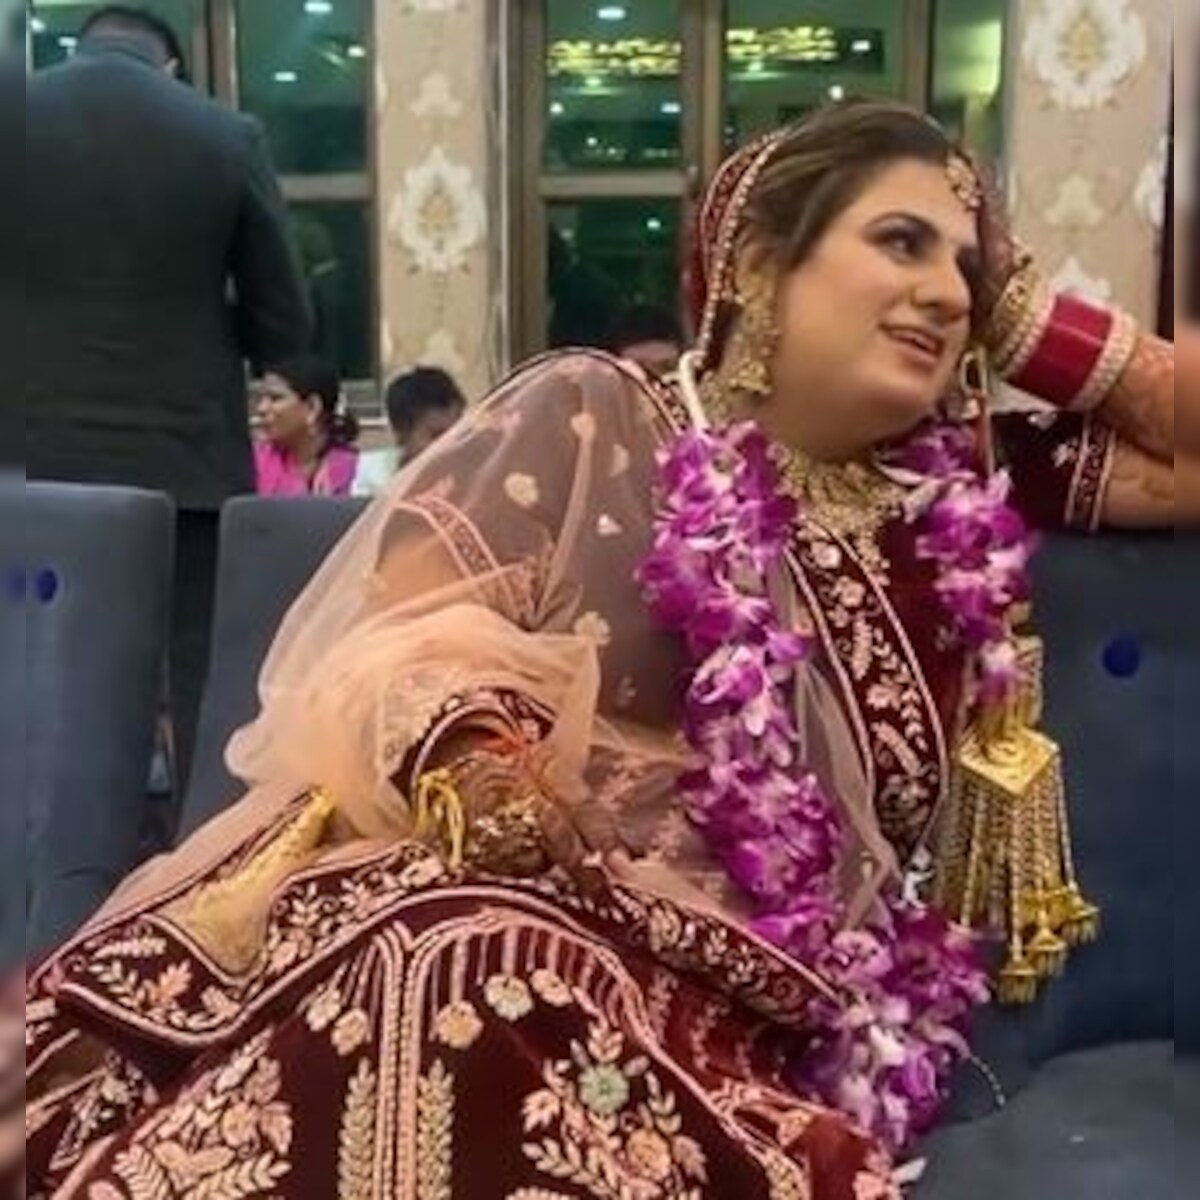 WATCH: Tired Bride Cannot Wait to Slip into Night Suit after Wedding Rituals